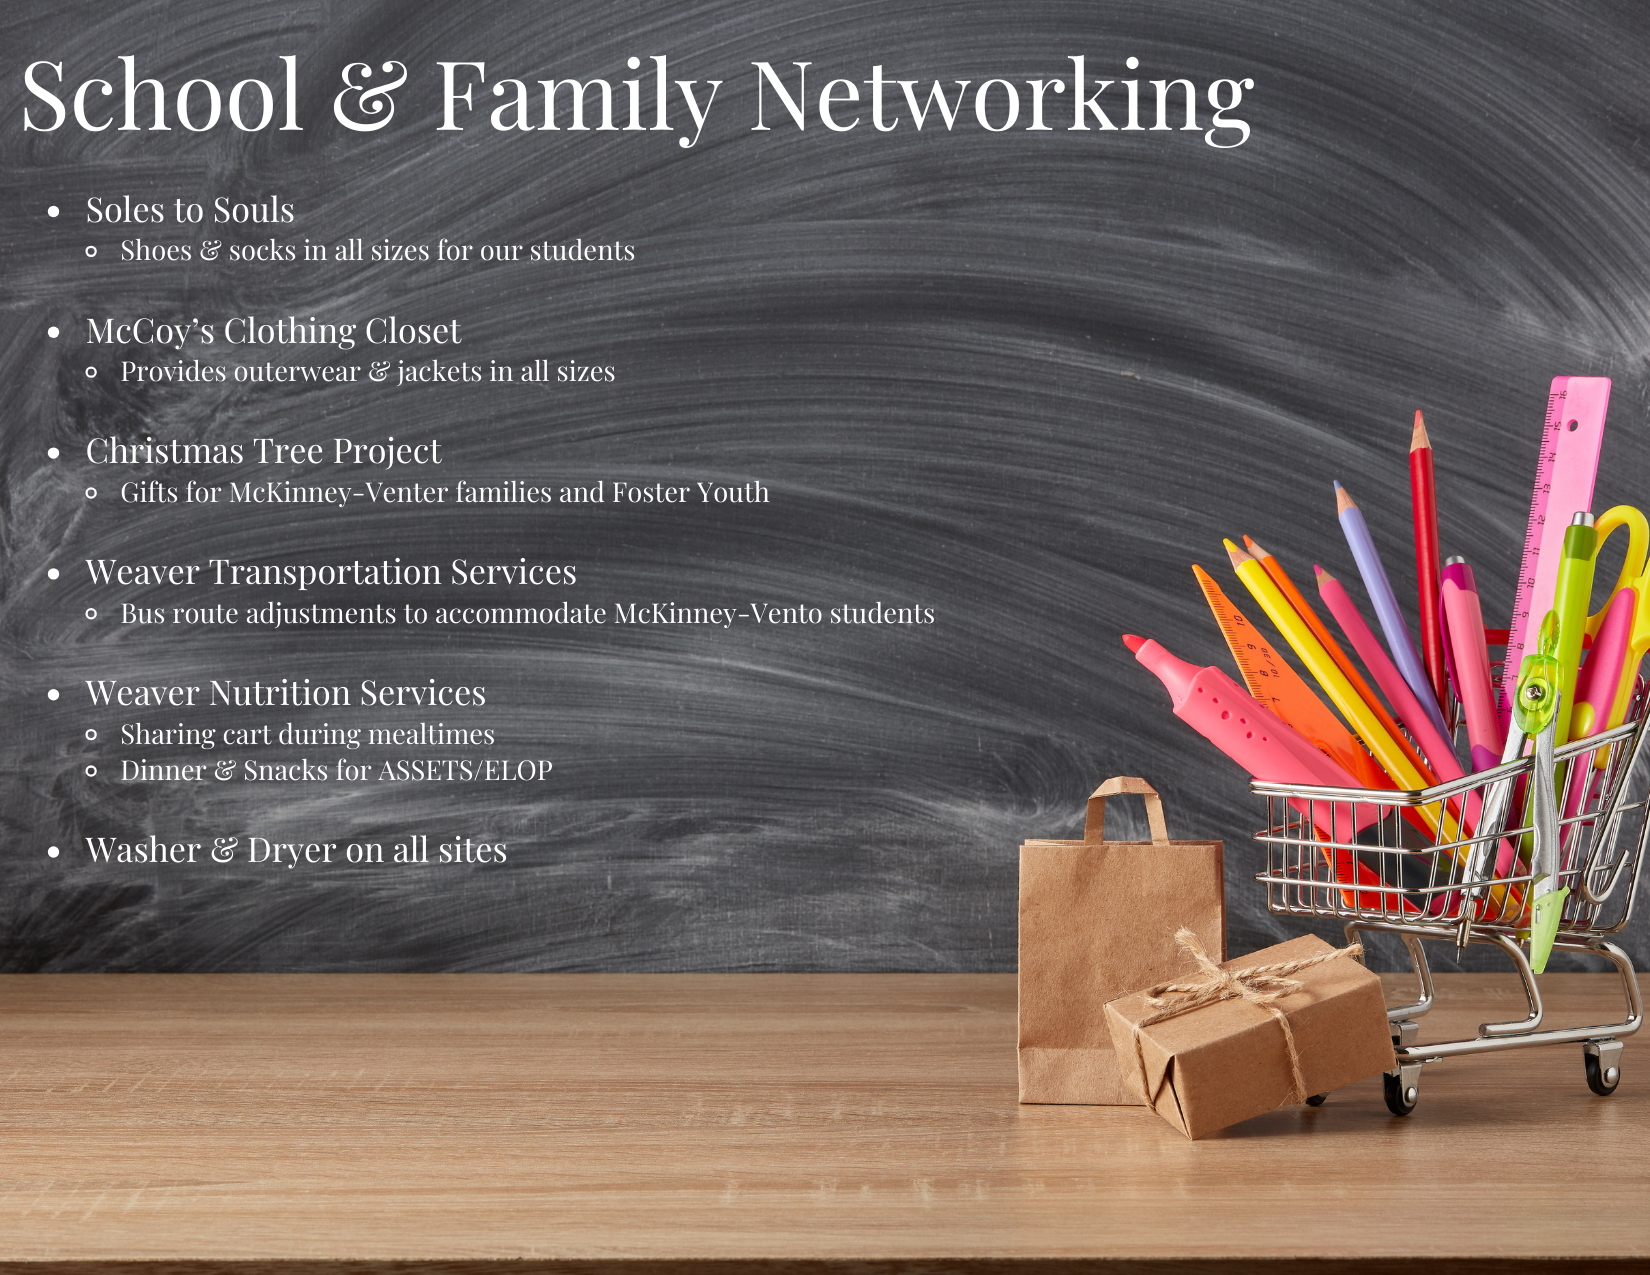 School & Family Networking